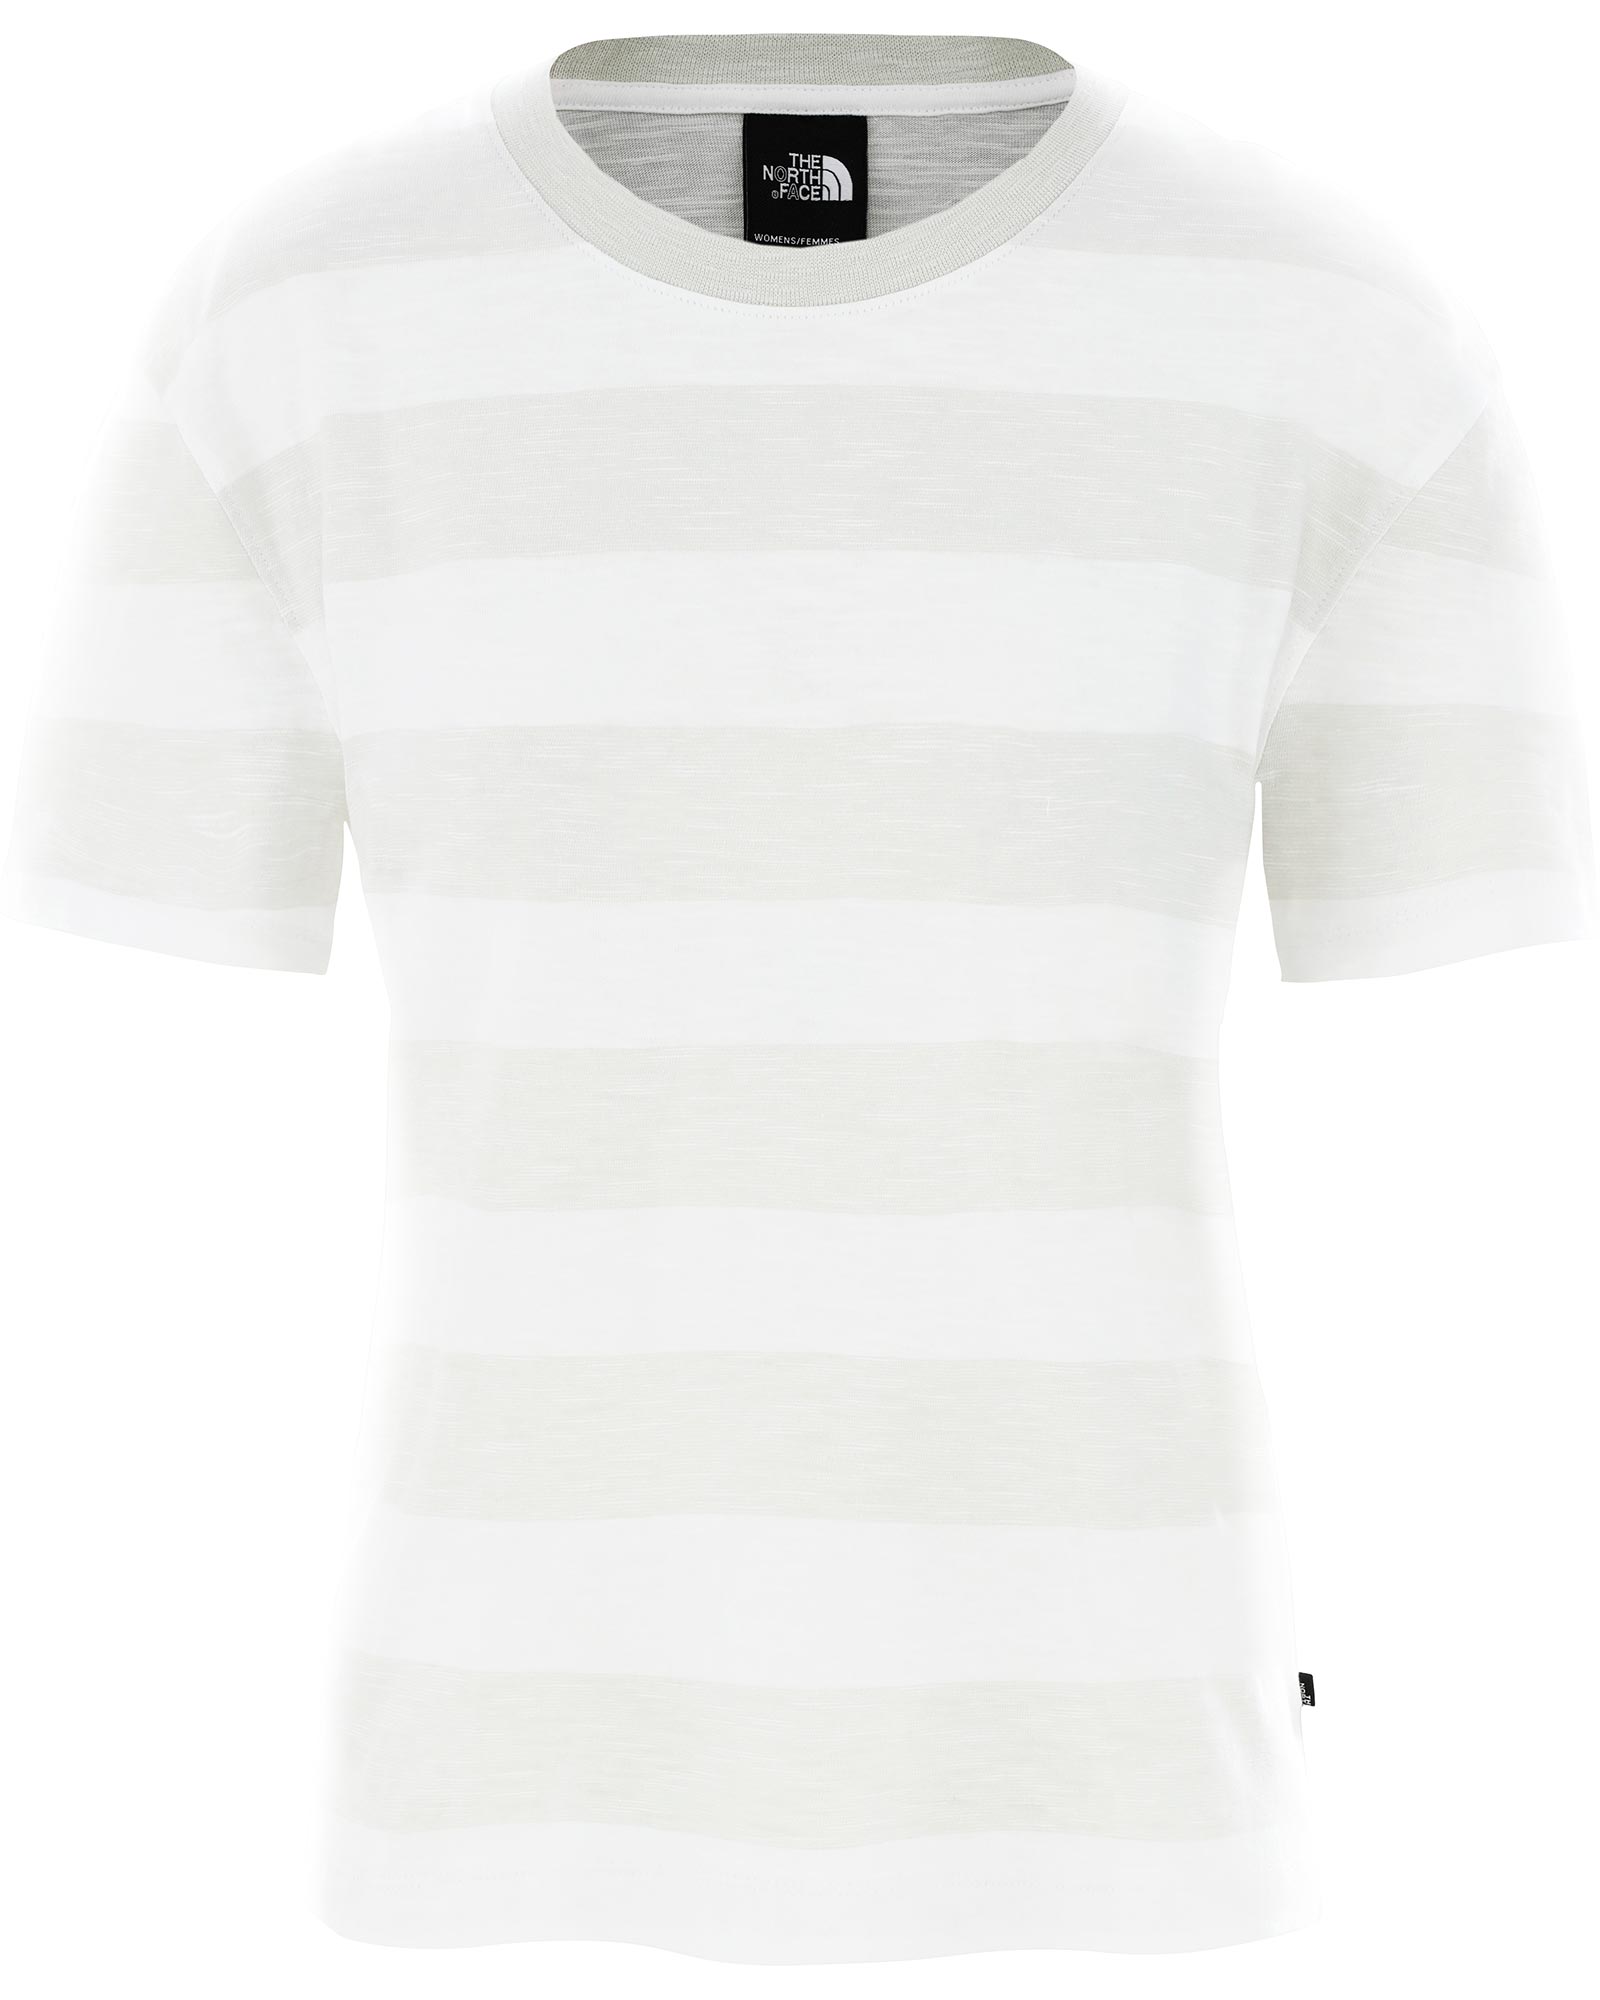 Product image of The North Face Stripe Women's Knit Top